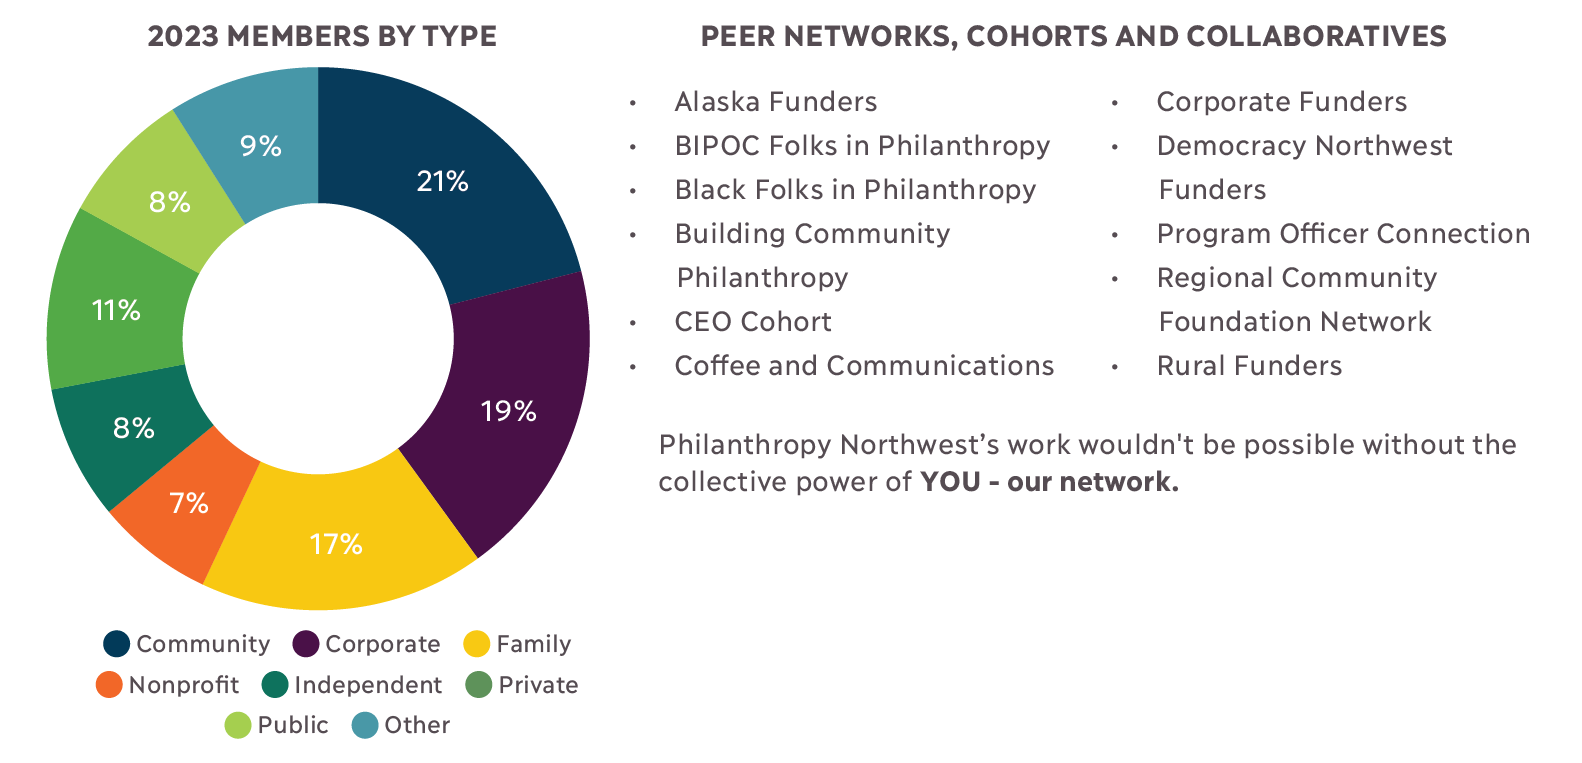 2023 Memberships by Type and Peer Networks, Cohort and Collaboratives